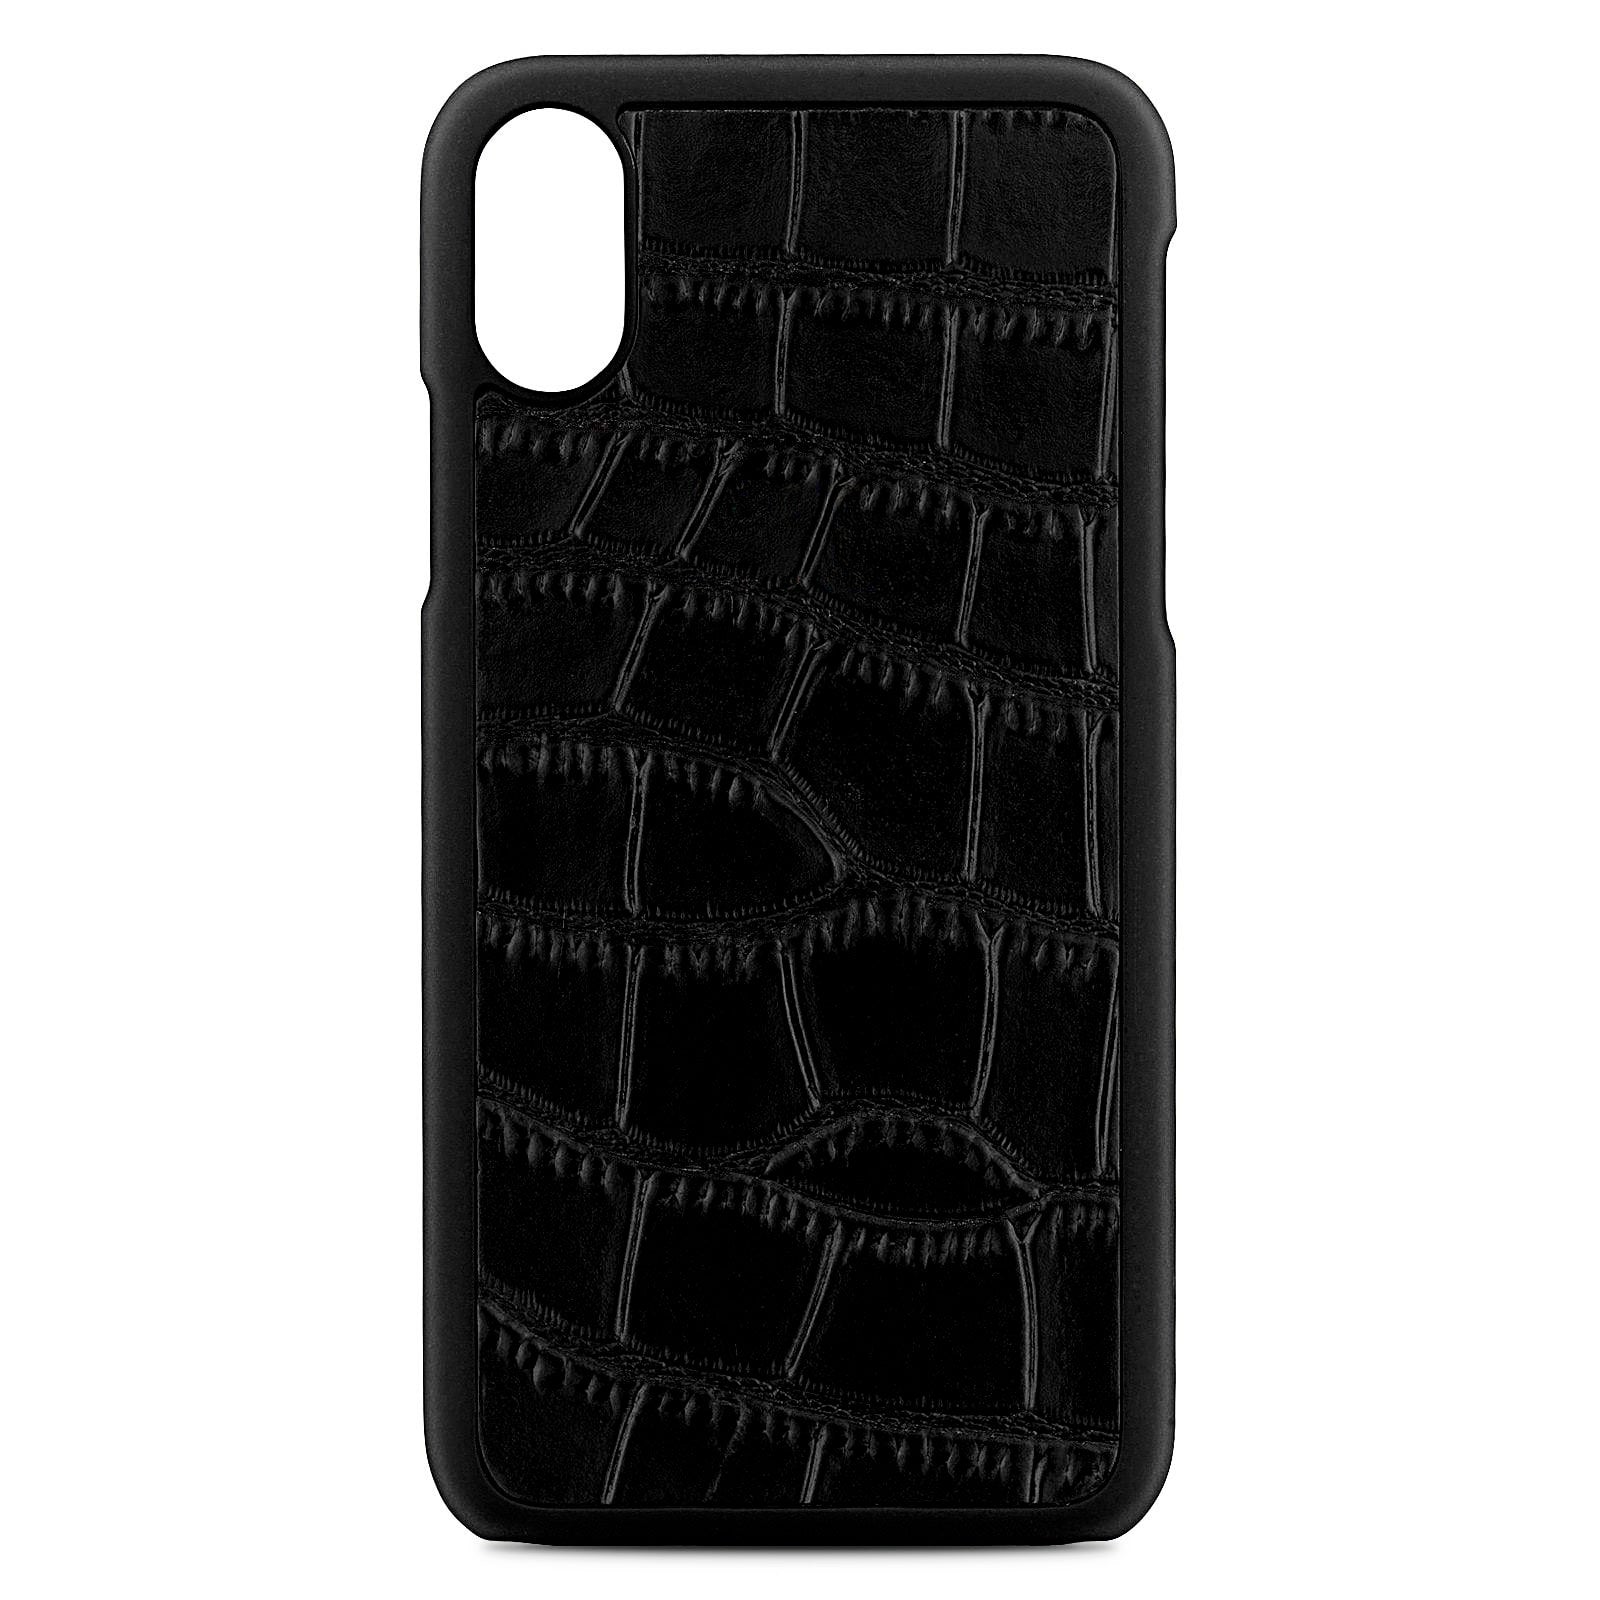 Blank Personalised Black Croc Leather iPhone X Case